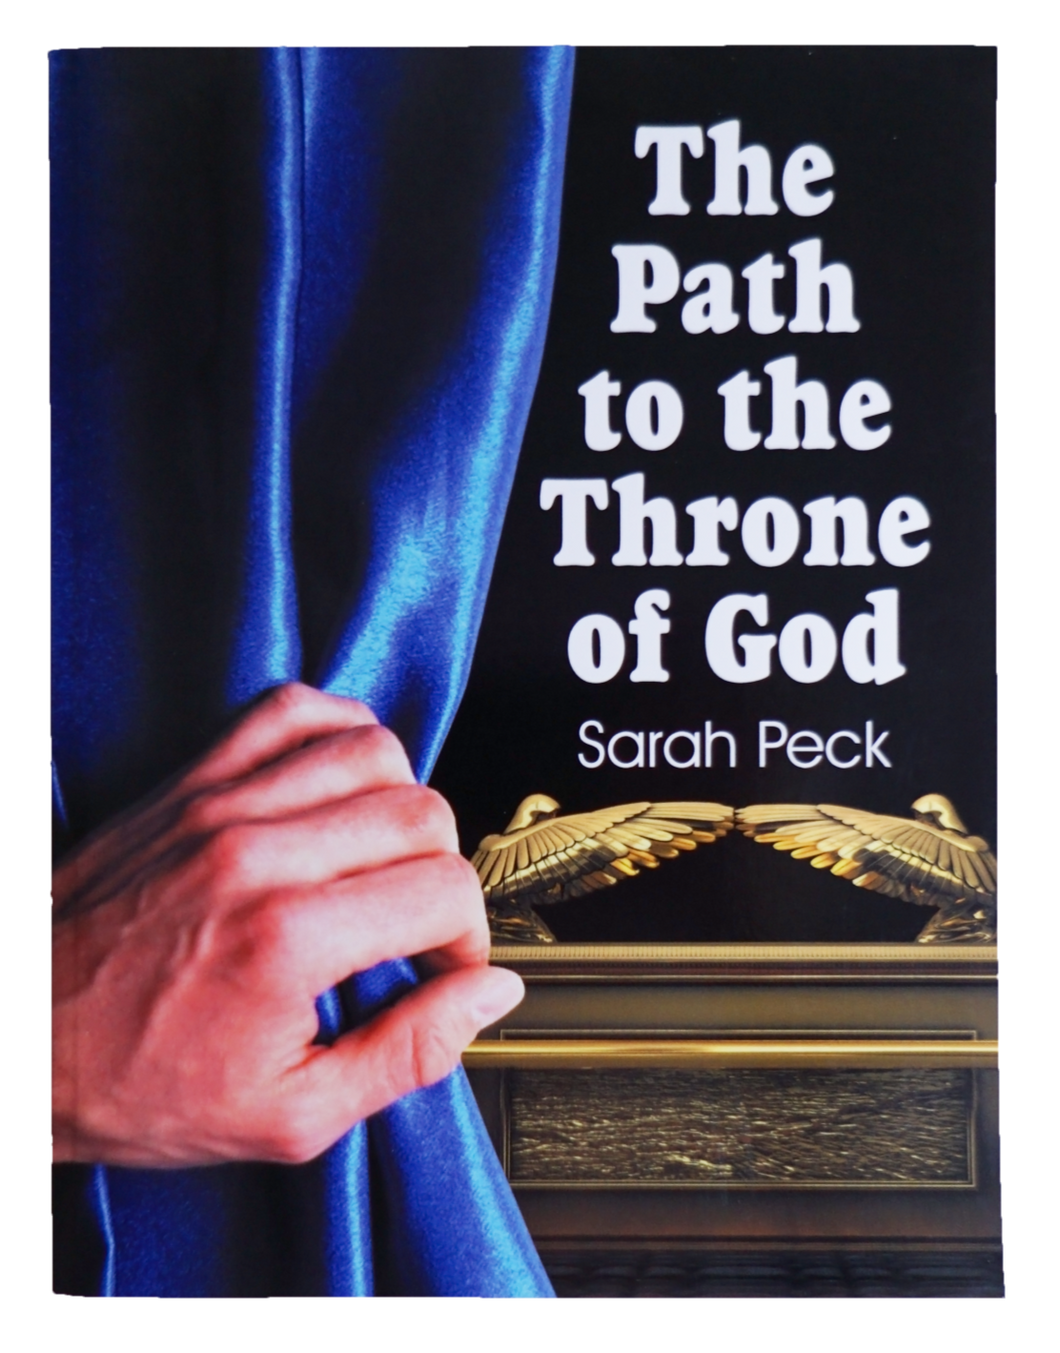 The Path to the Throne of God